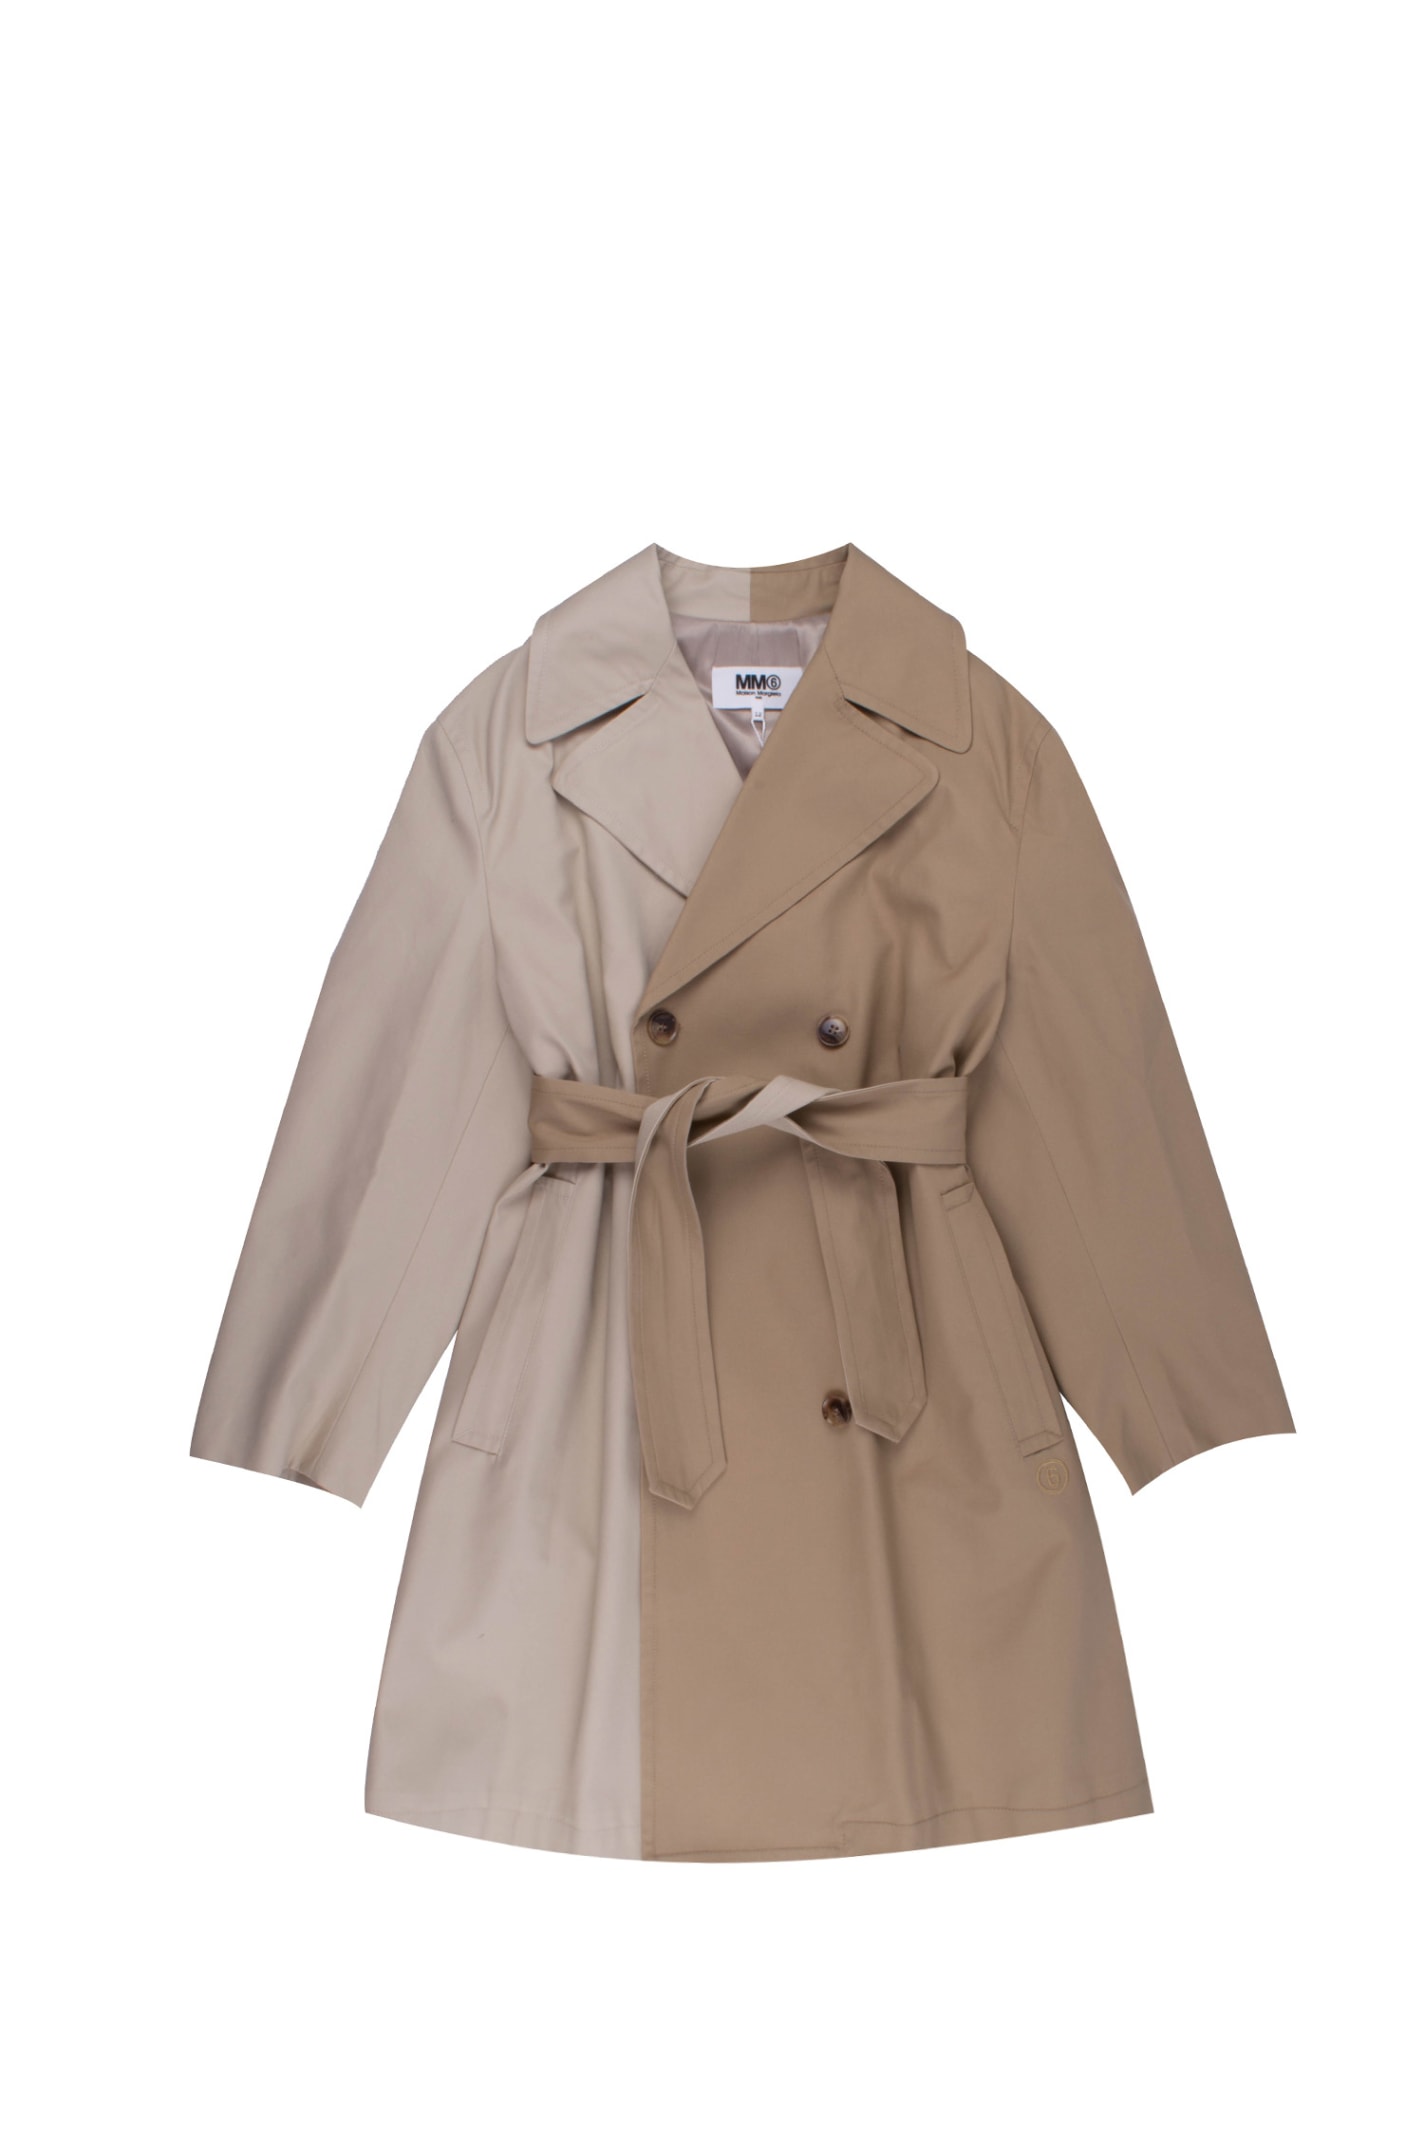 MM6 Maison Margiela Two-tone Trench In Cotton